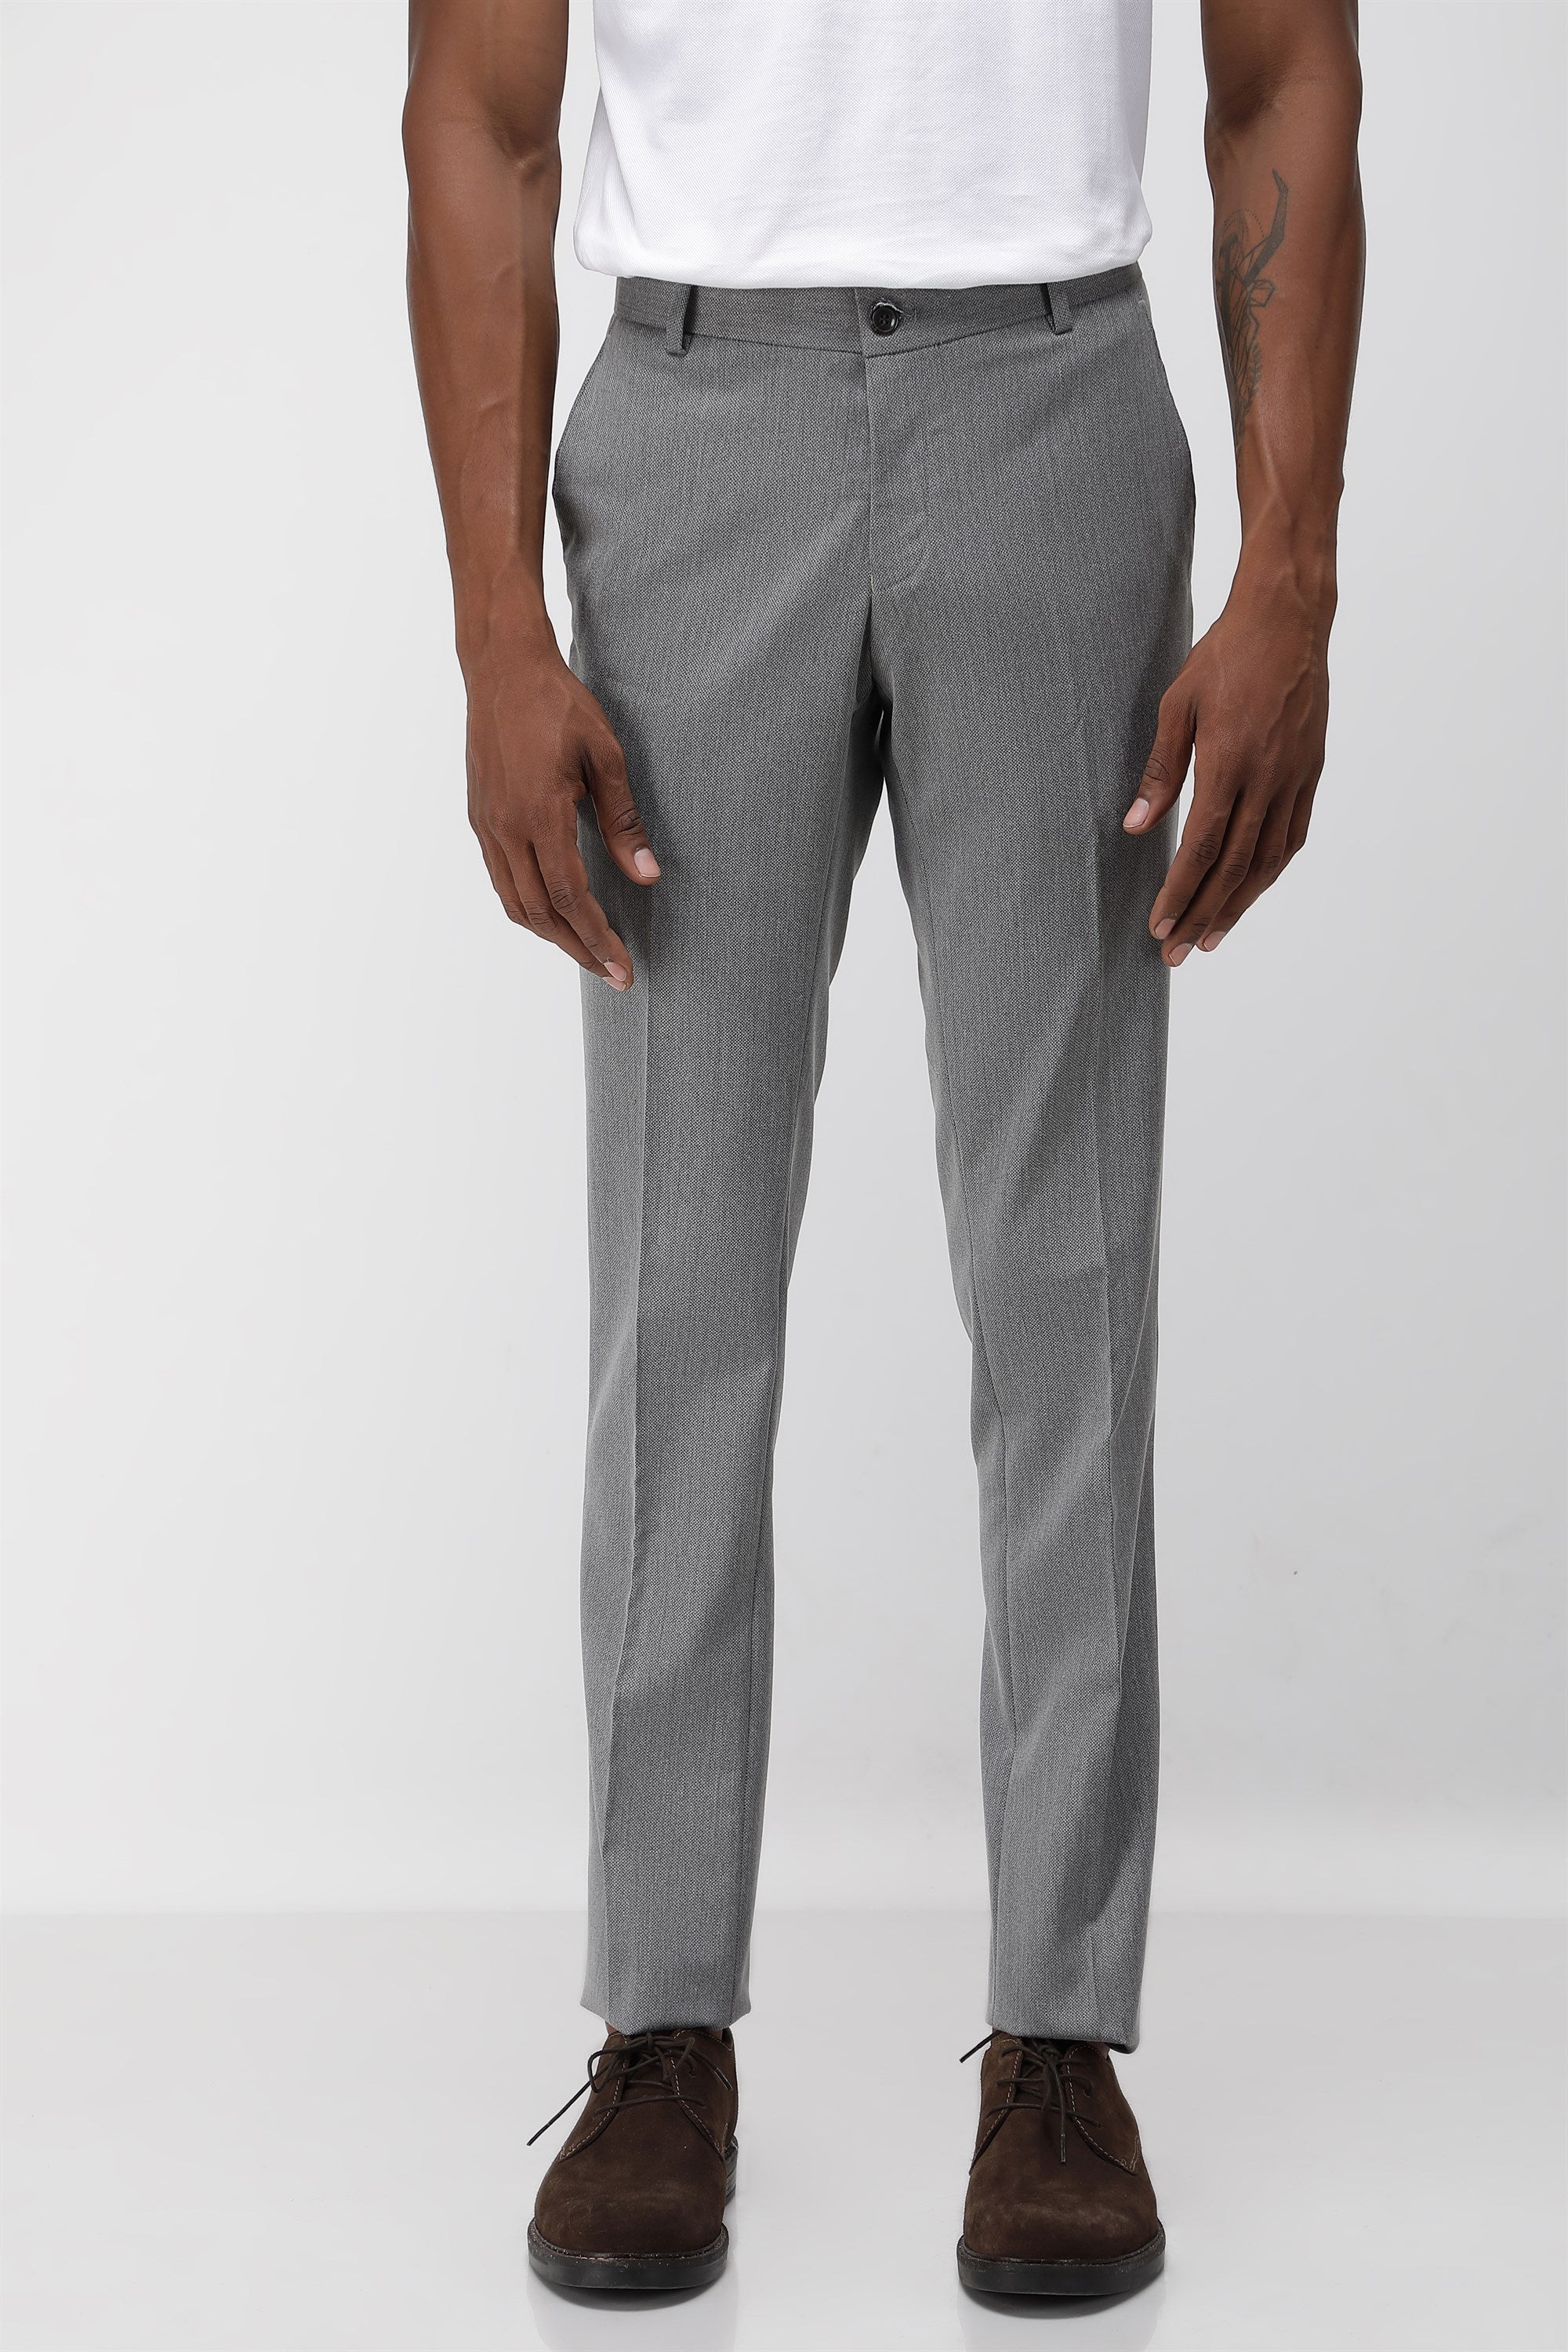 Trouser Pant Mens Formal Non Pleated  MT88